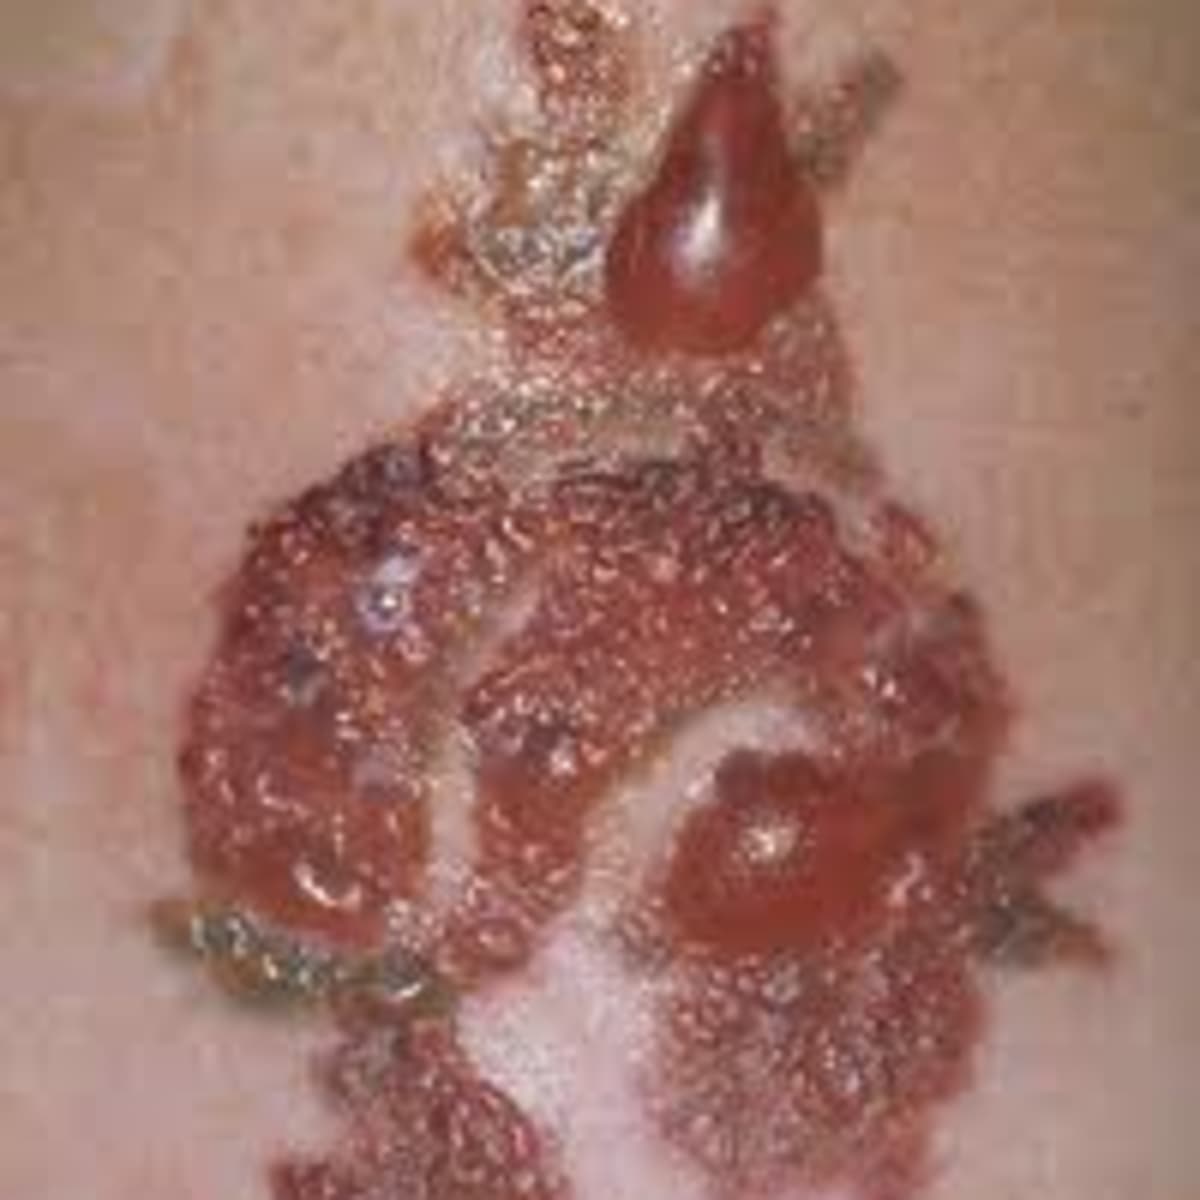 How to Treat a Tattoo Infection - HubPages